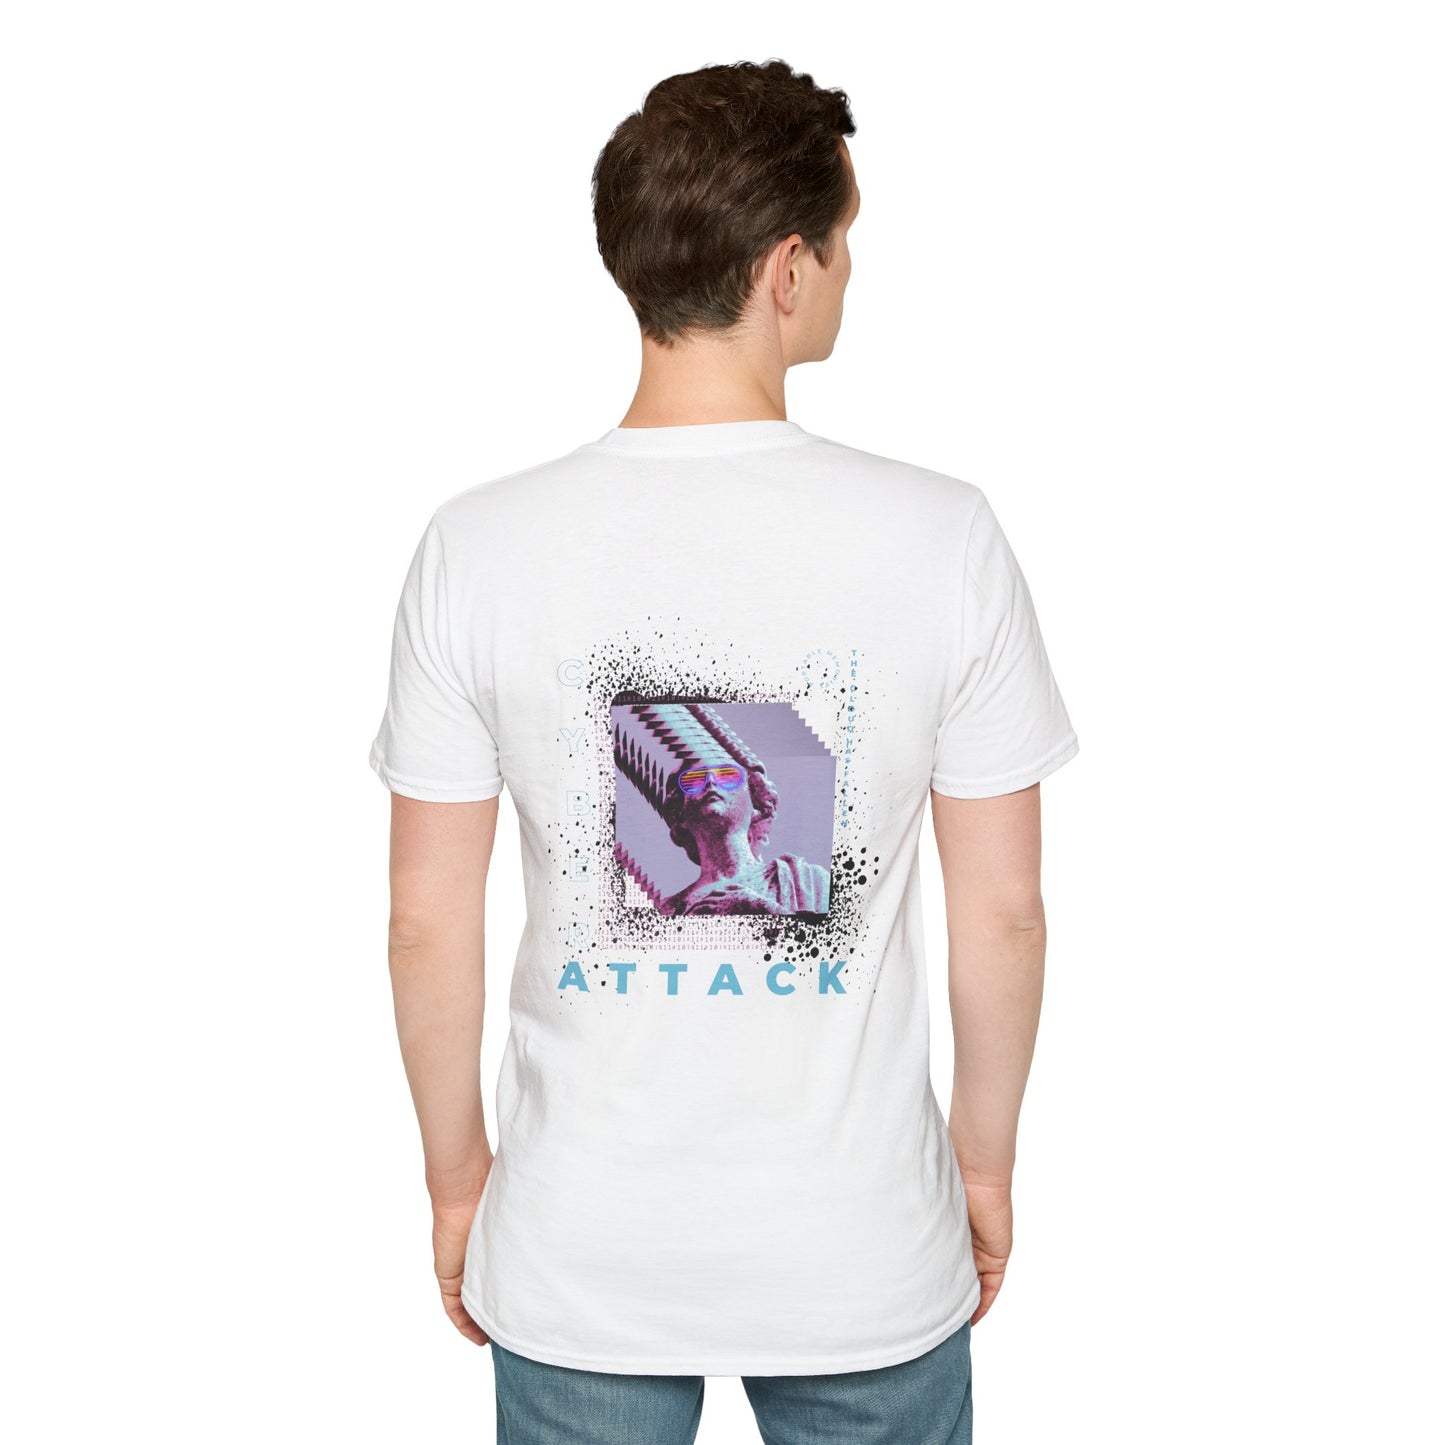 White T-shirt with a pixelated Statue of Liberty and modern glitch art design